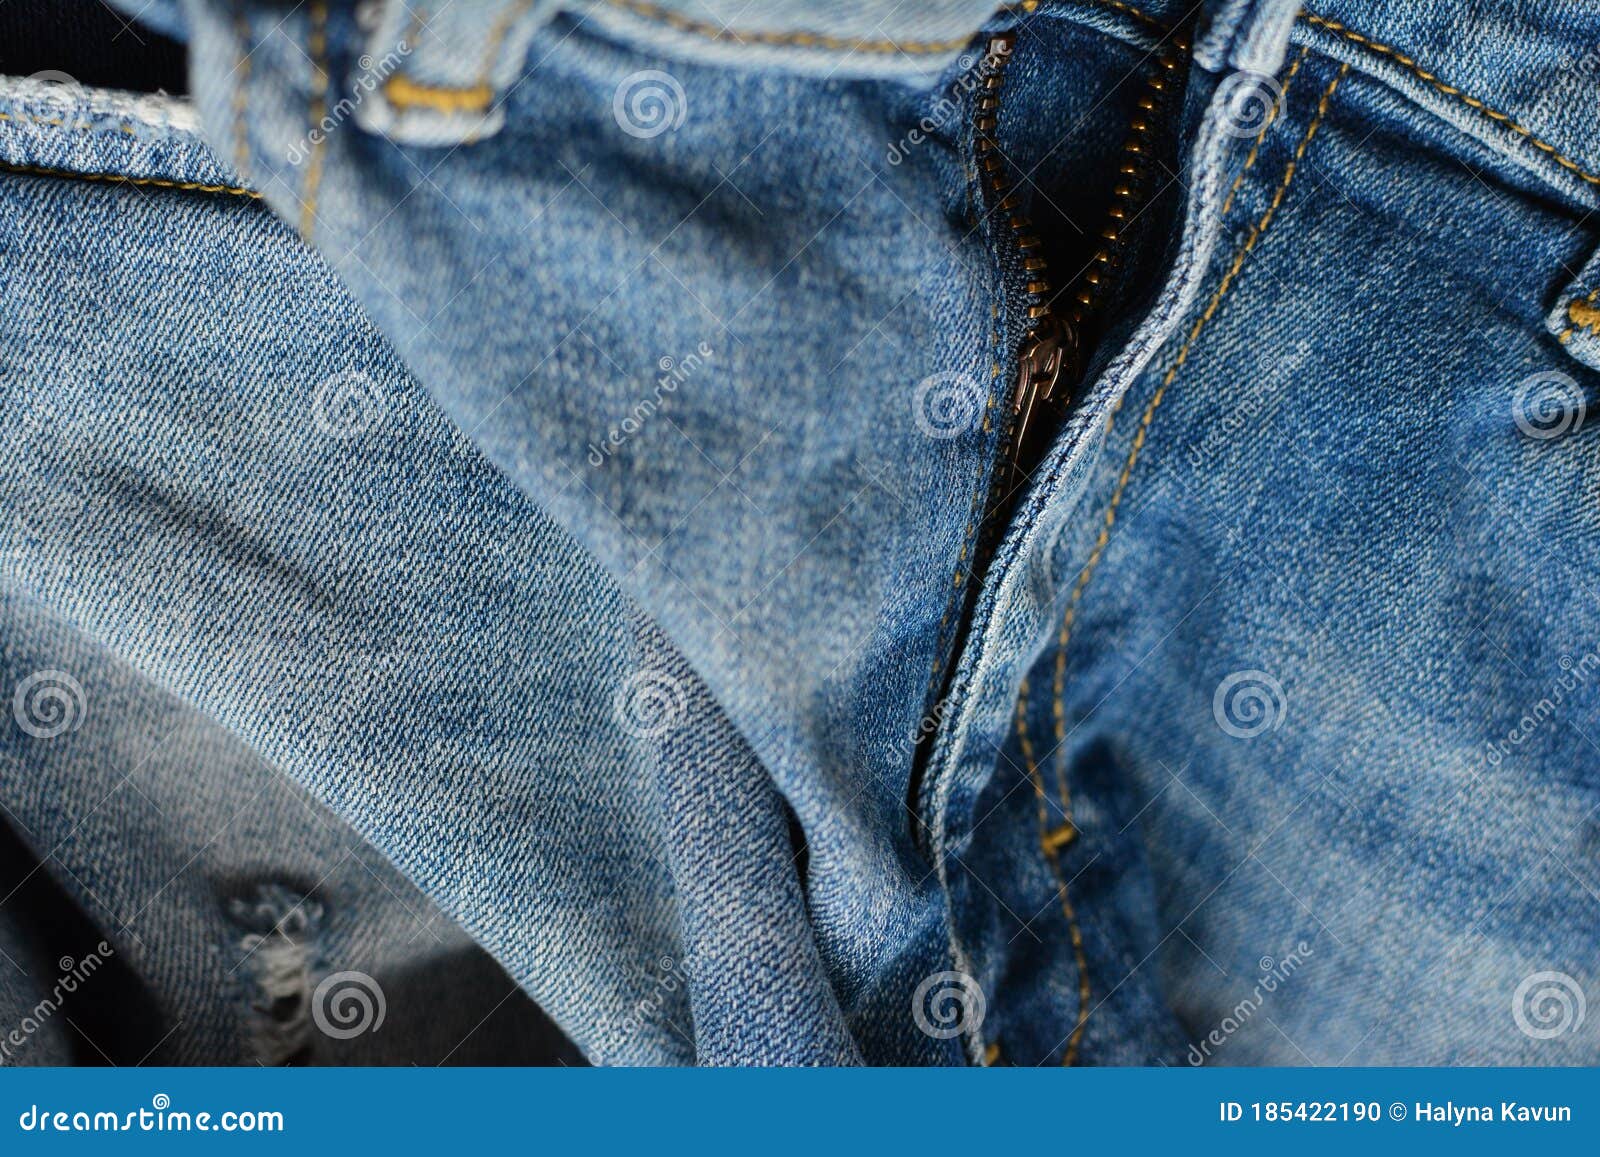 3,138 Ripped Pants Photos - Free & Royalty-Free Stock Photos from ...